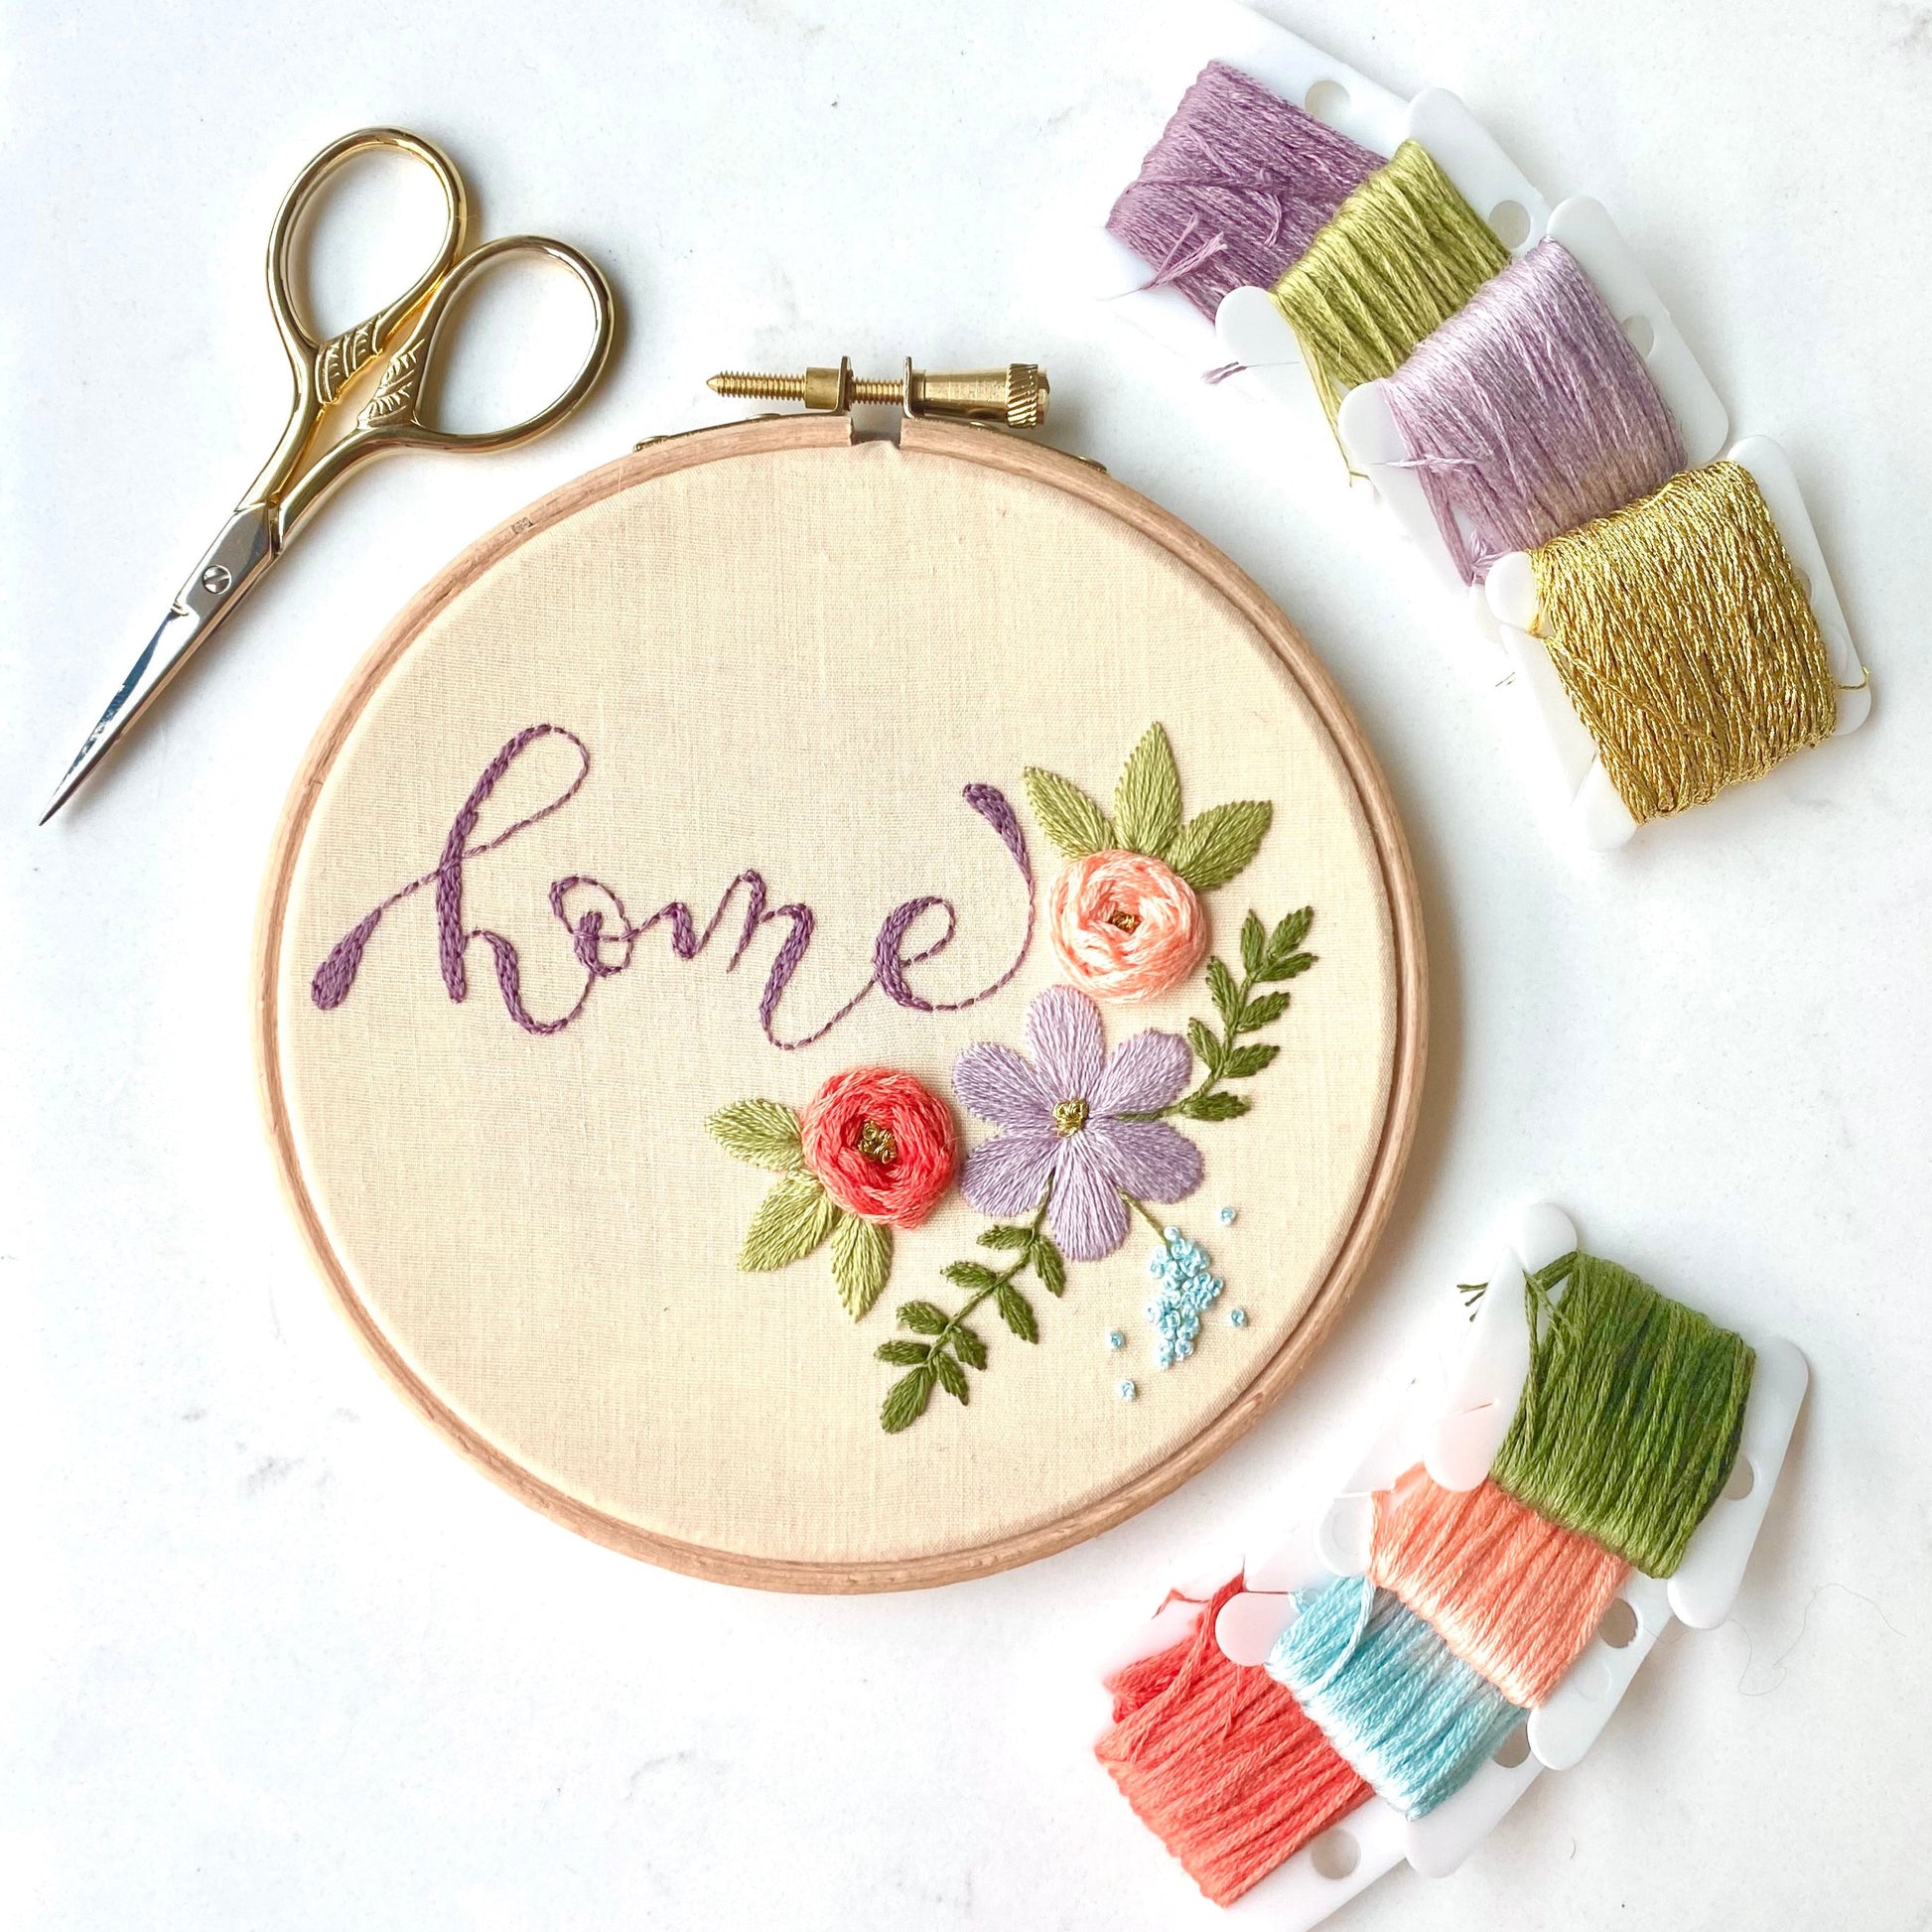 Home Embroidery Kit